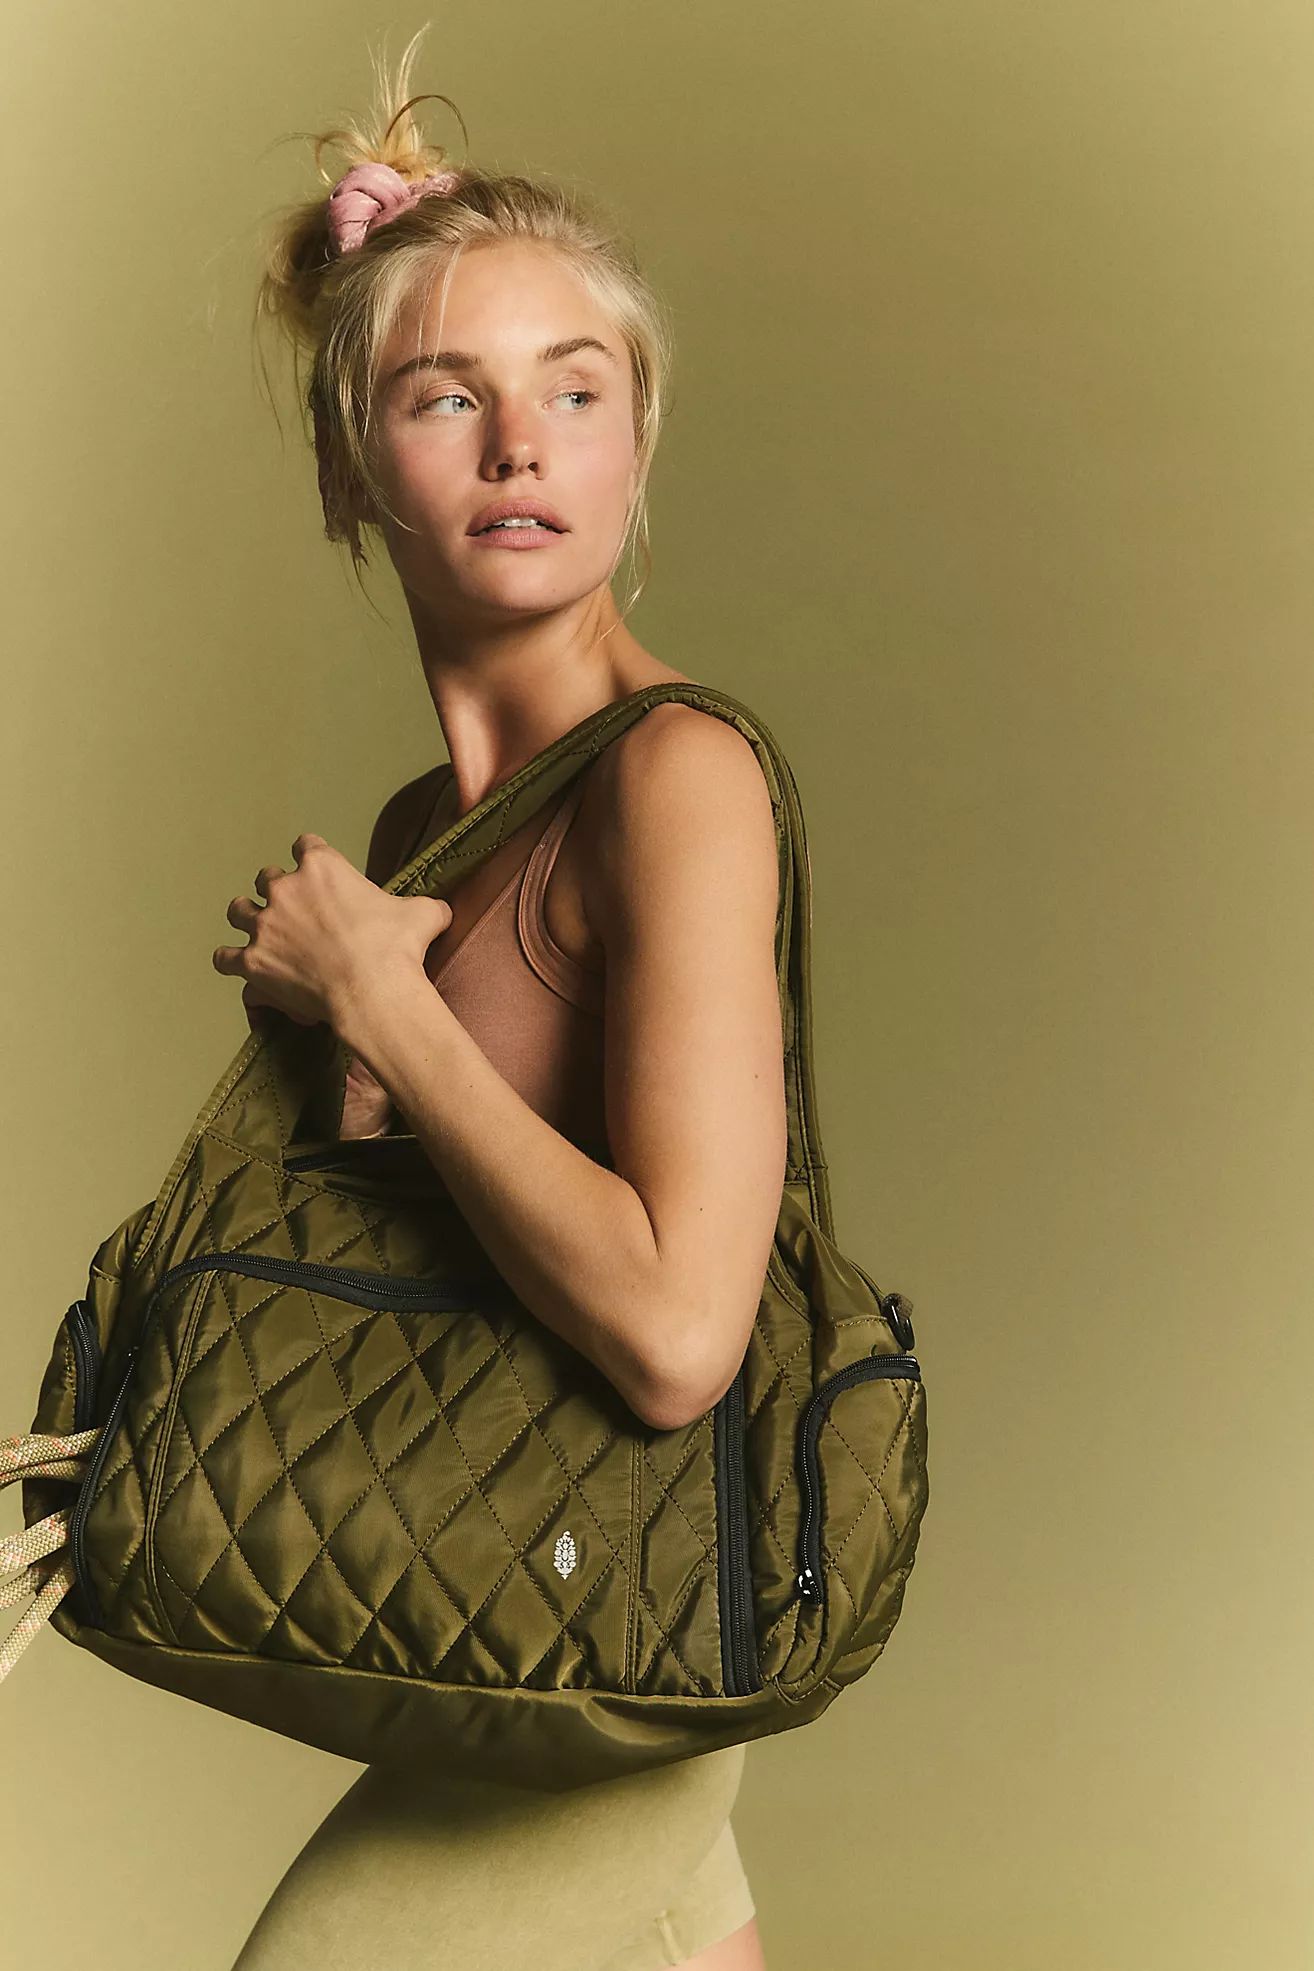 FP Movement Quilted Duffle Bag | Free People (Global - UK&FR Excluded)